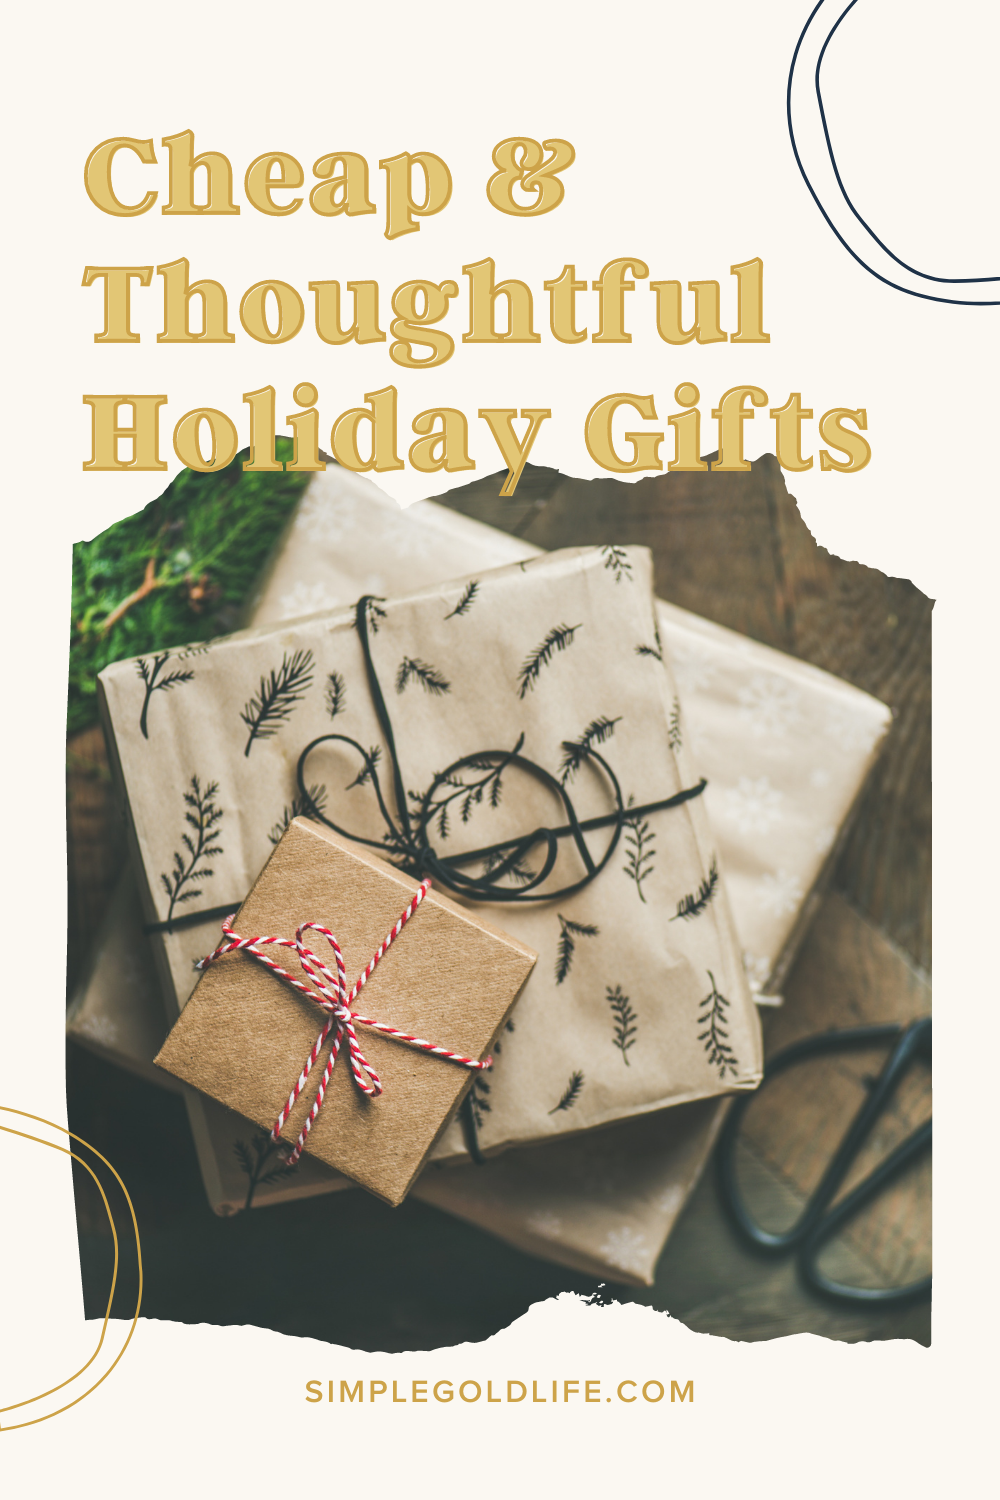  Best Thoughtful Gift Ideas for Adults! Your mom, best friend, and family will love them!  